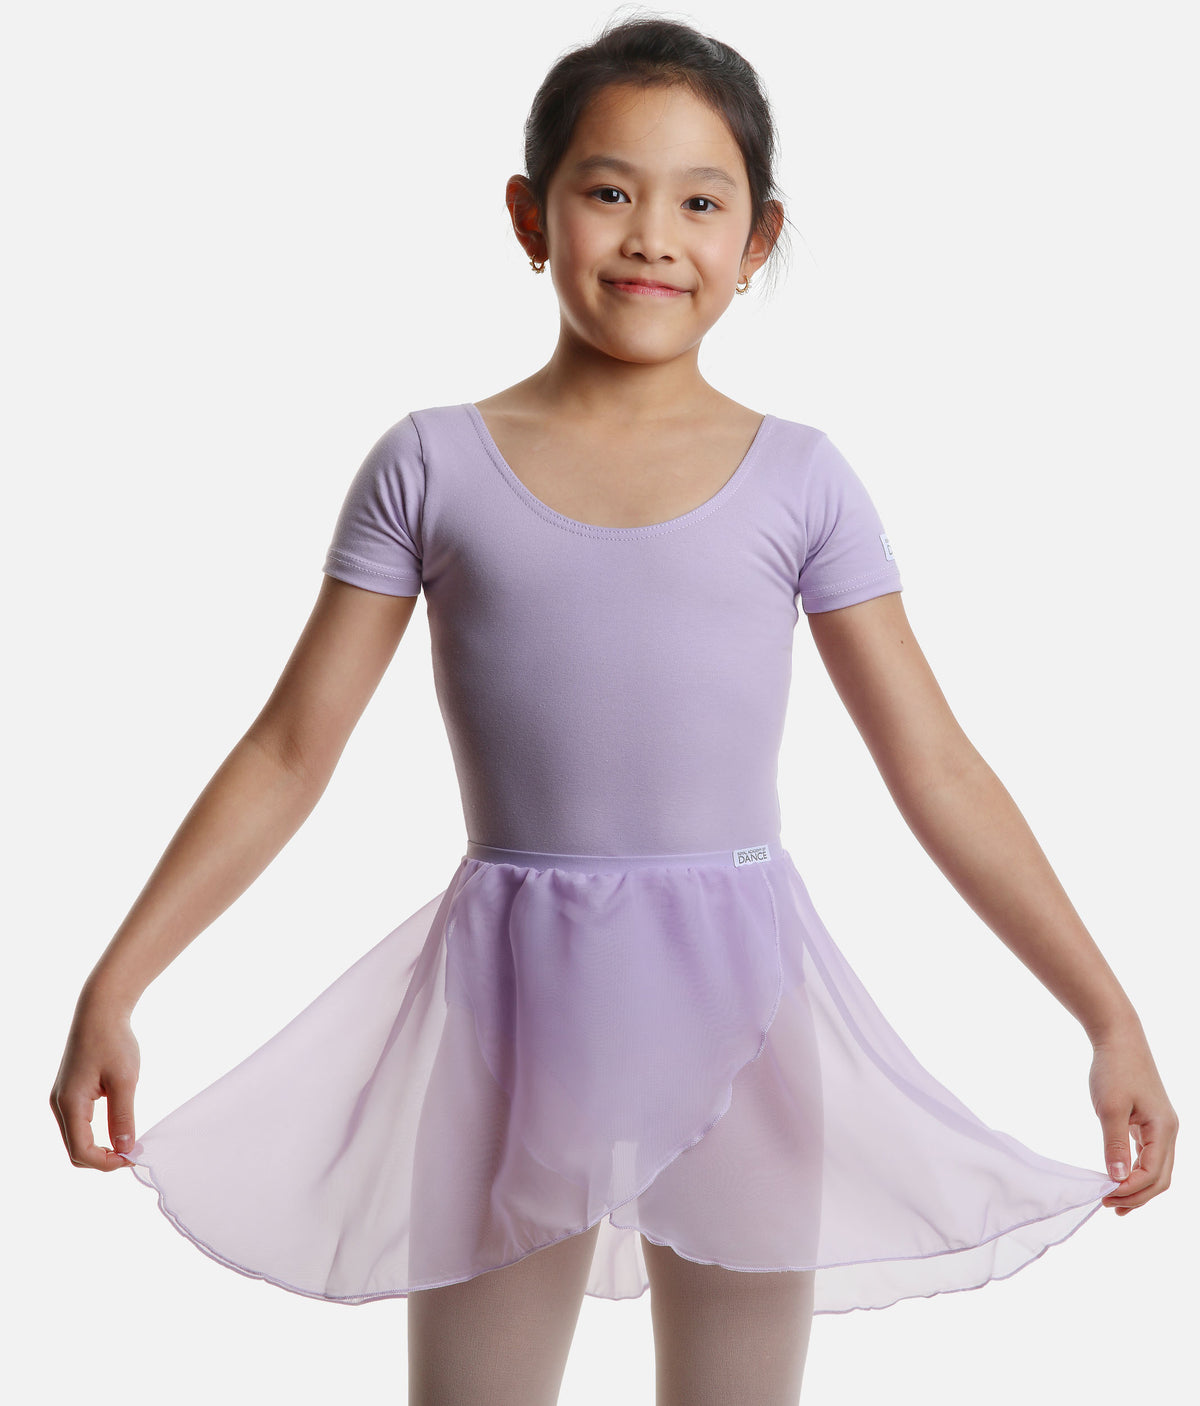 toddler ballet outfits near me